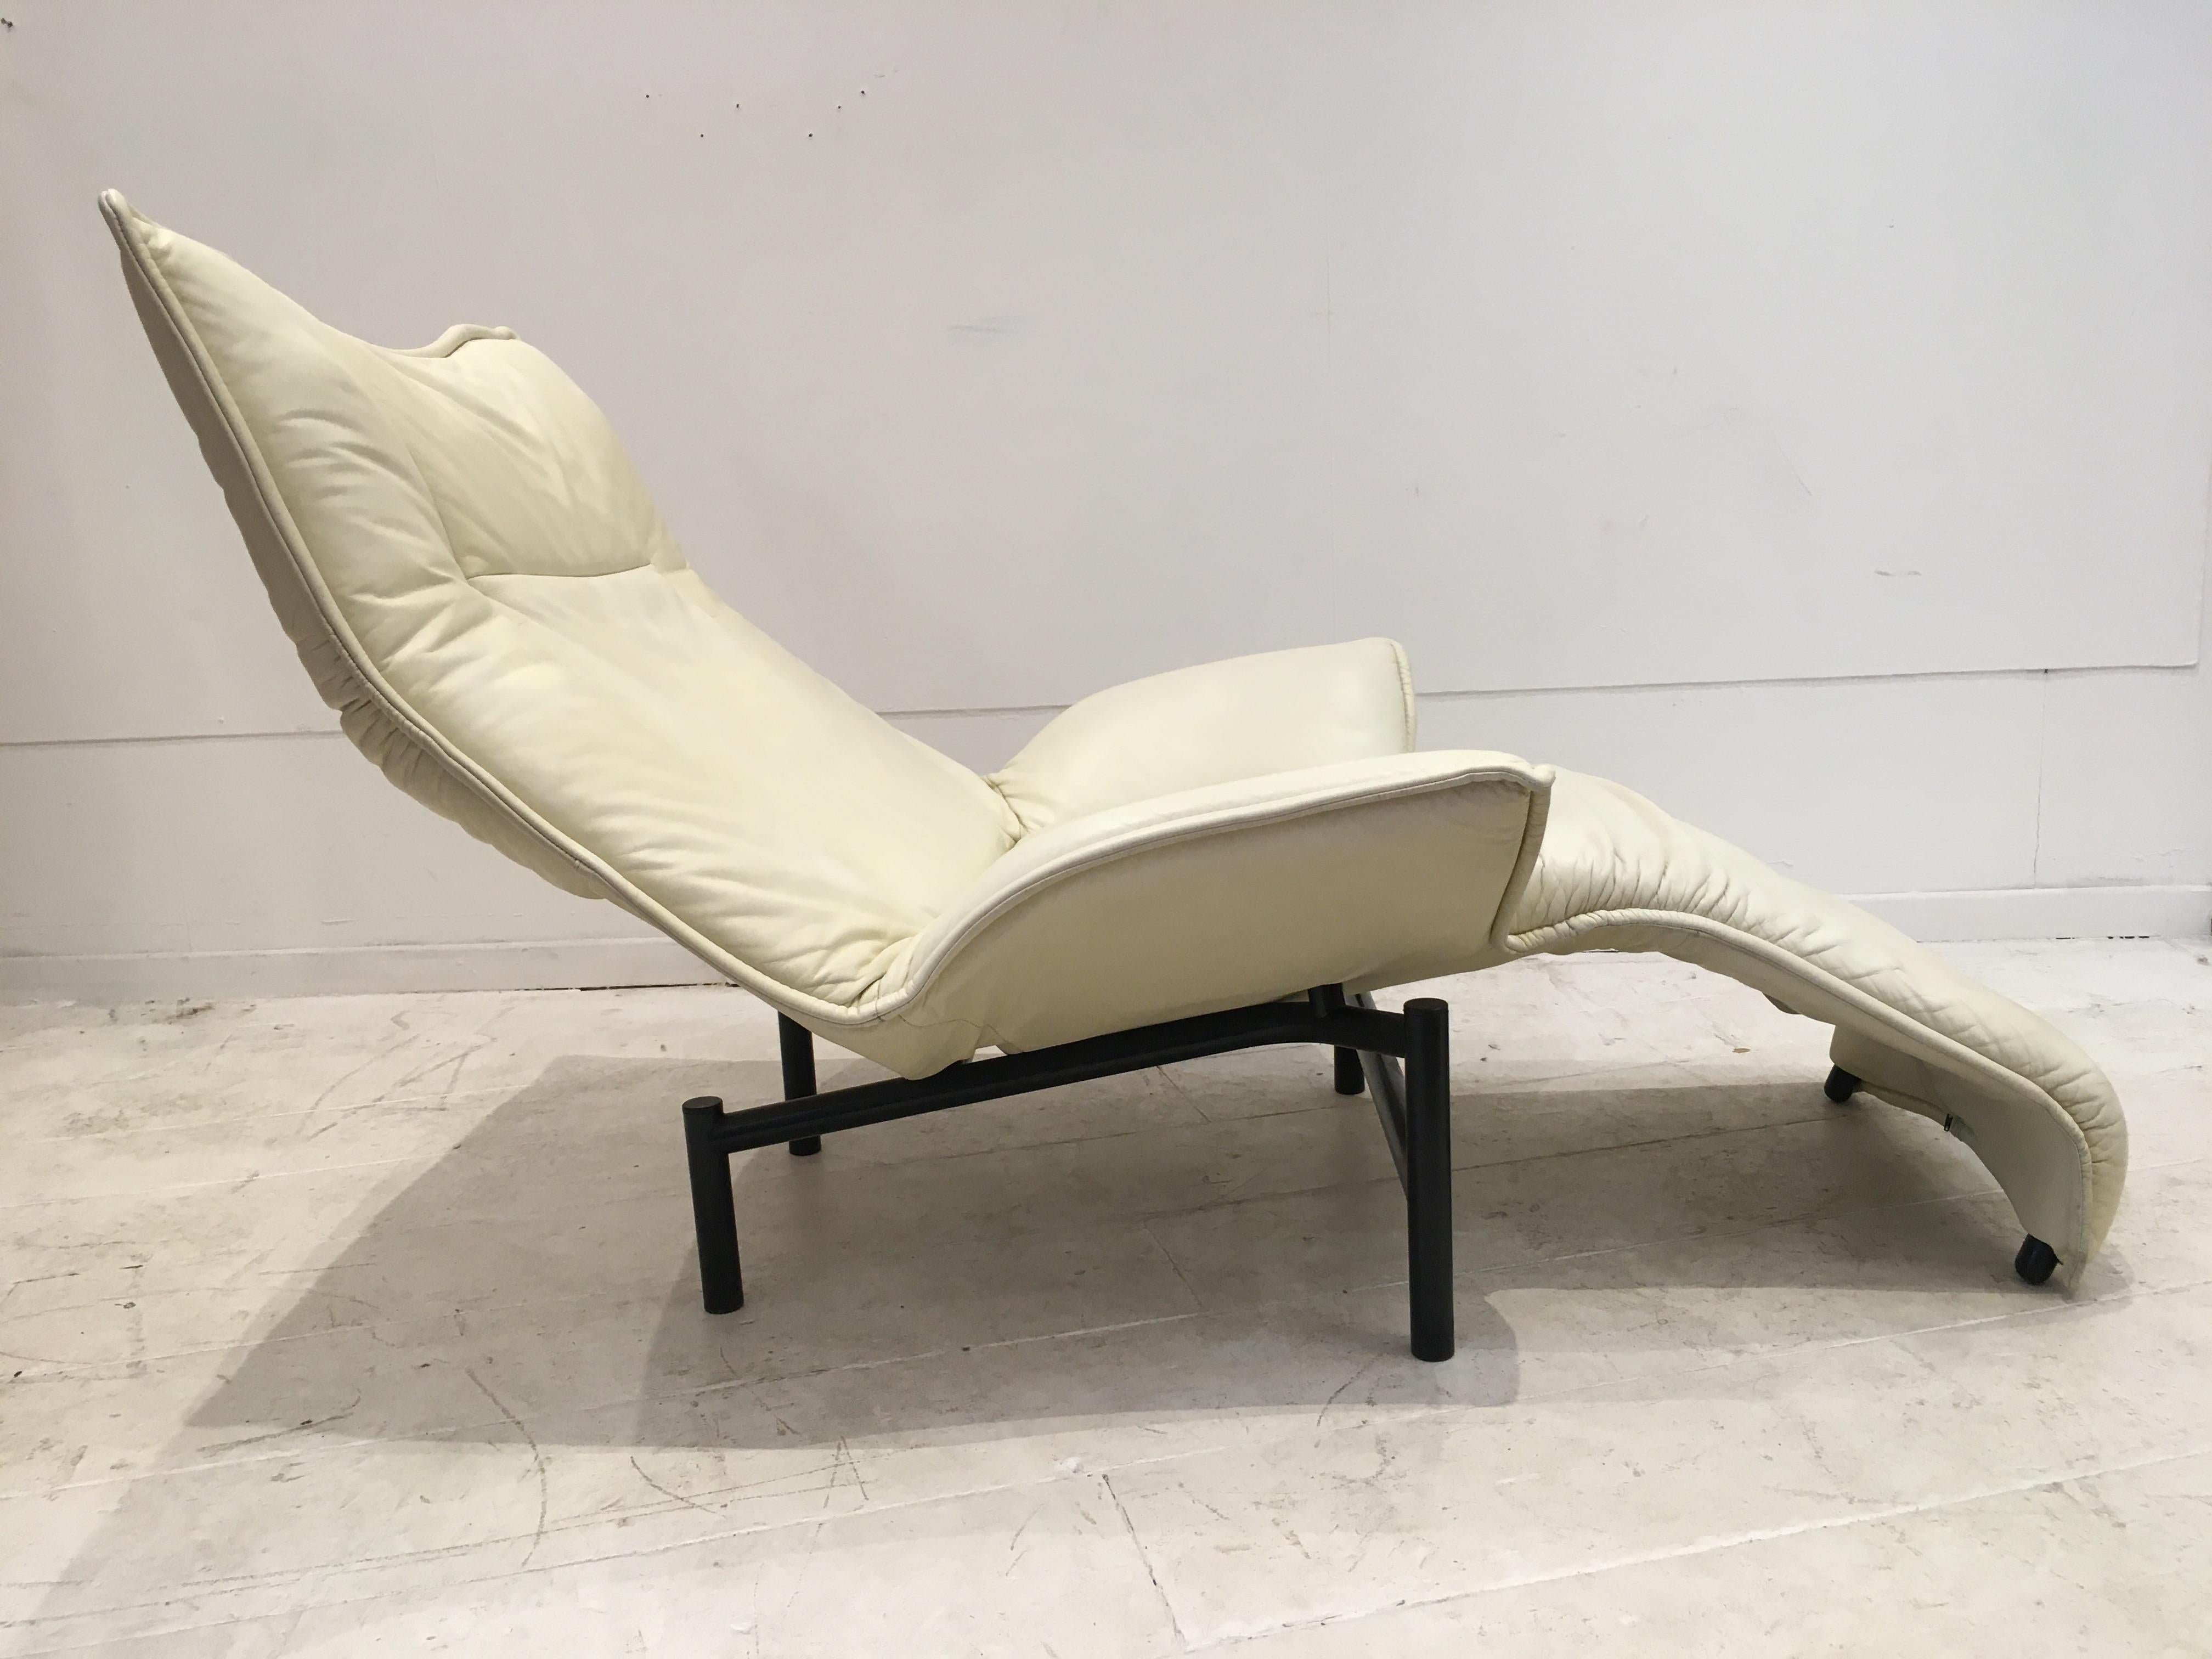 Italian Lounge Chair 'White' by Vico Magistretti for Cassina